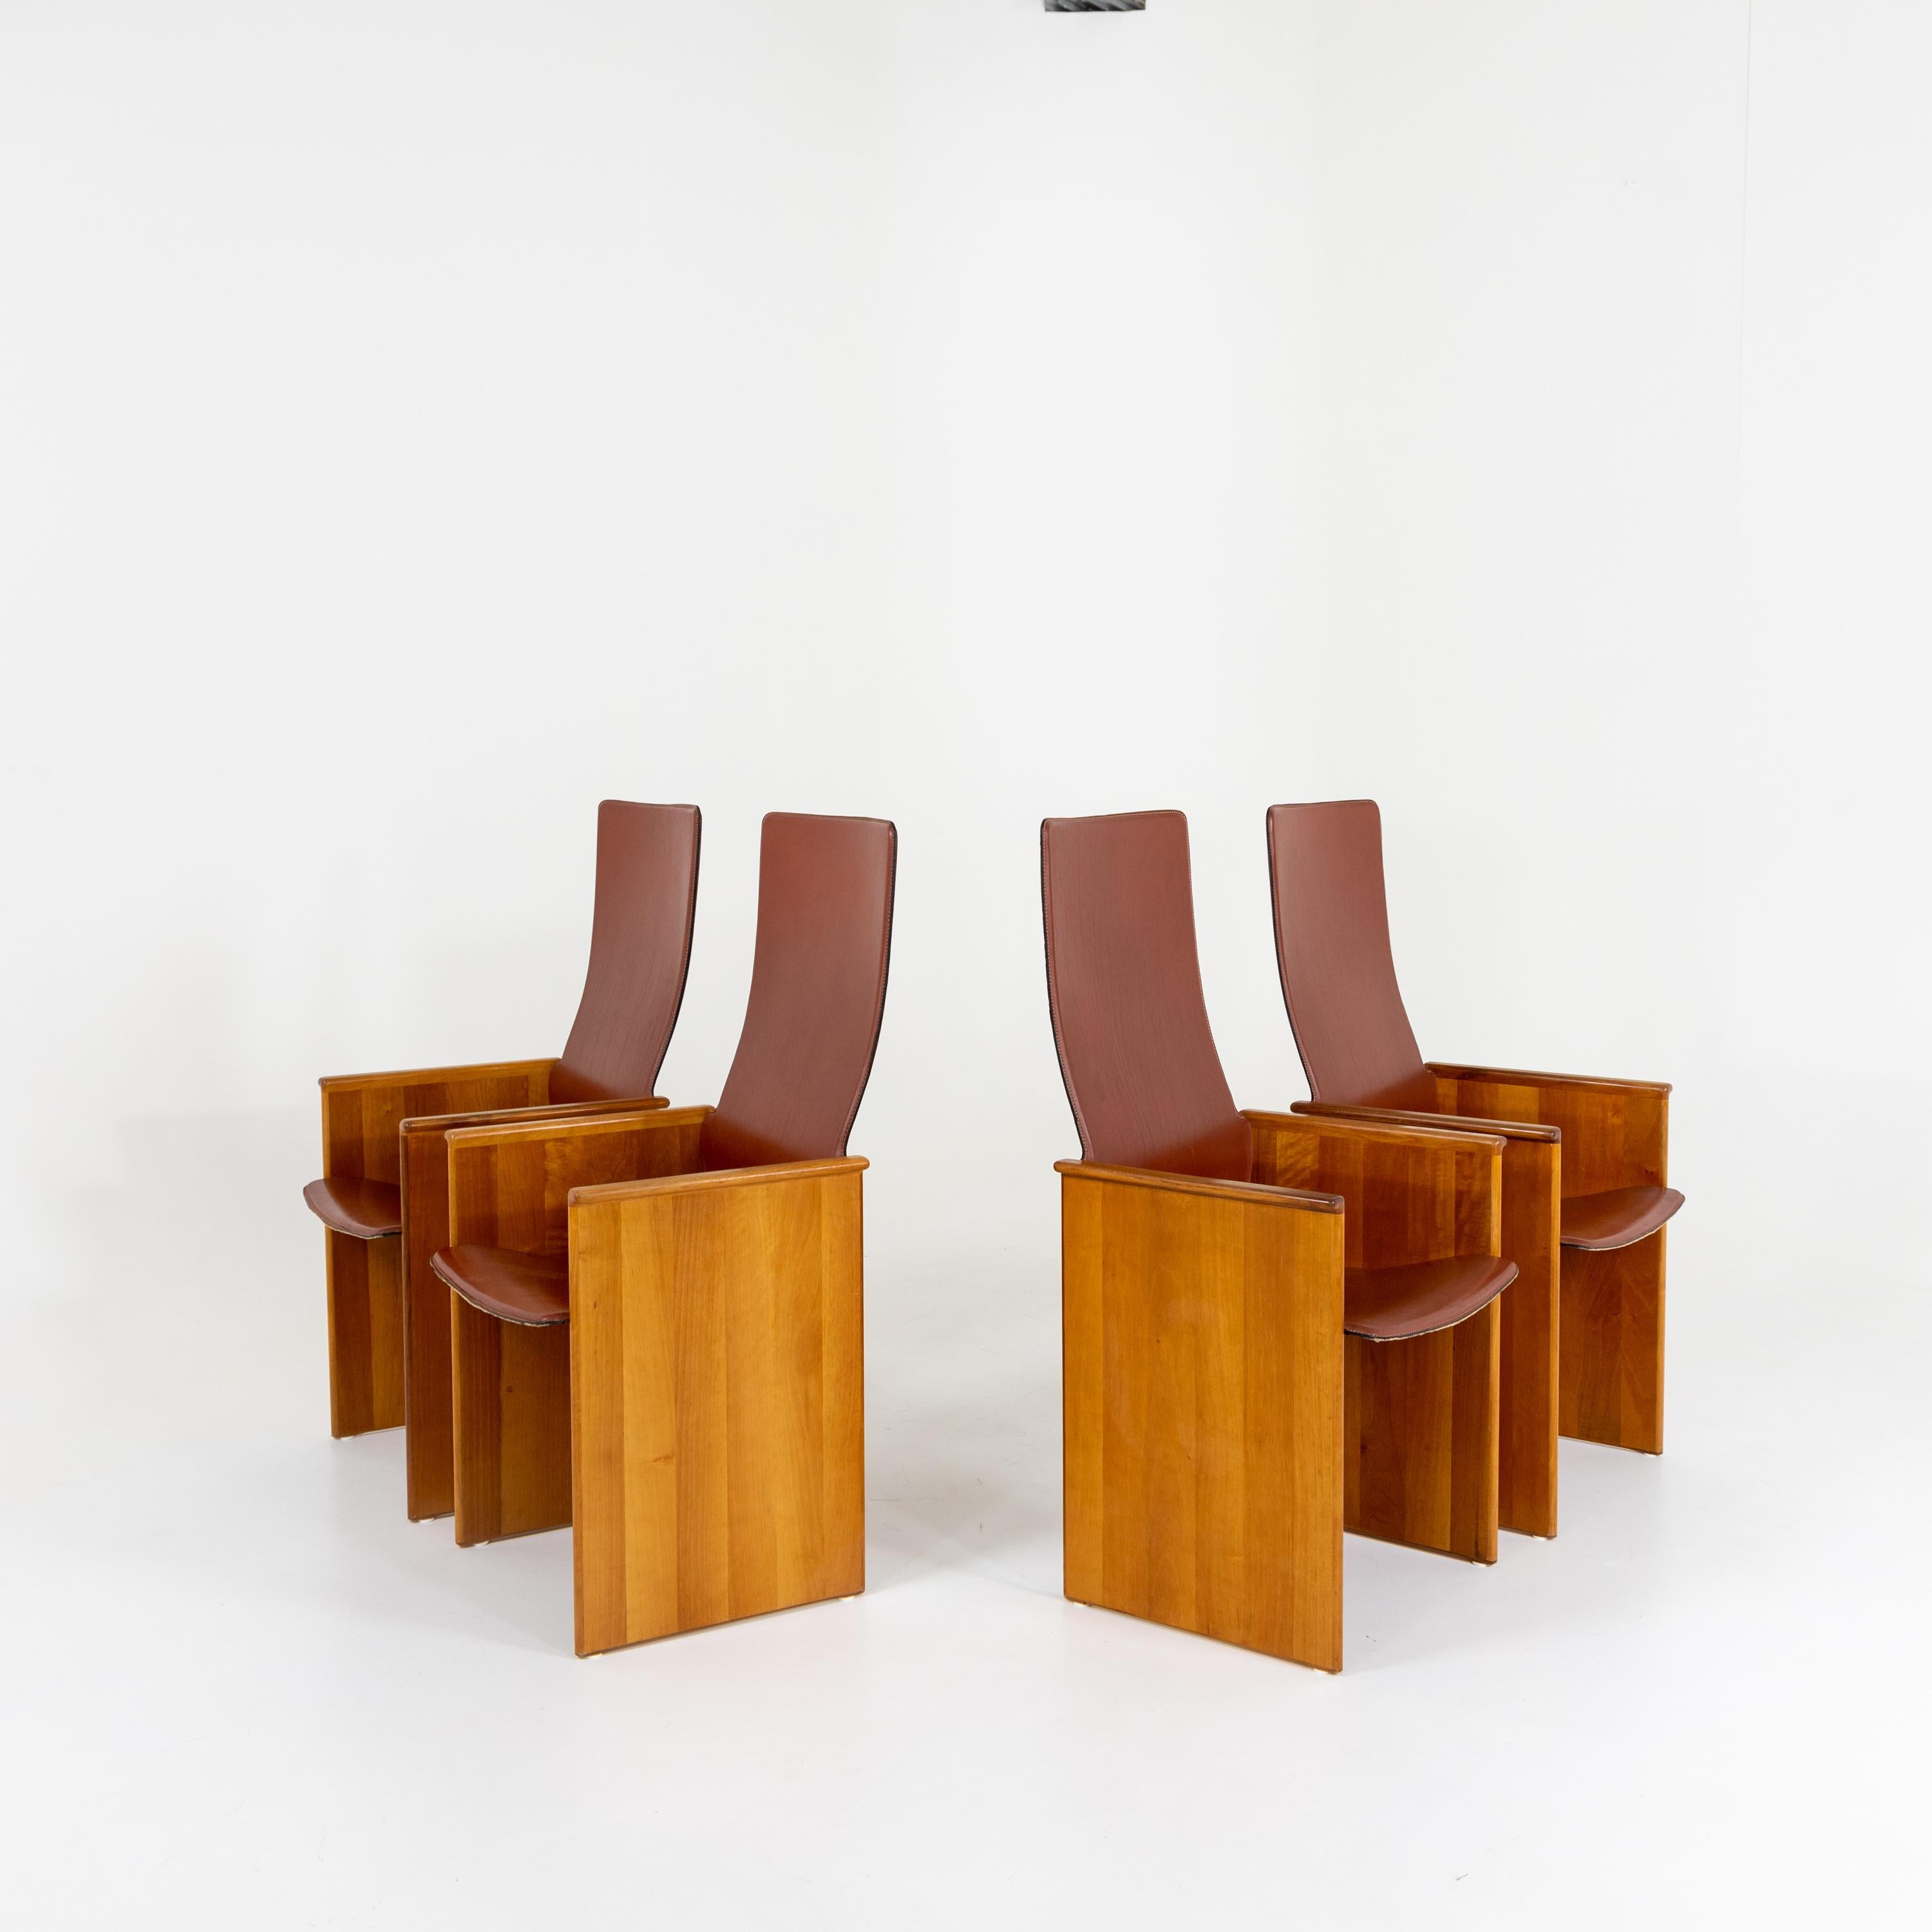 Set of four arm chairs with seats covered in brown leather designed by Afra and Tobia Scarpa for Stildmous 1964.

 